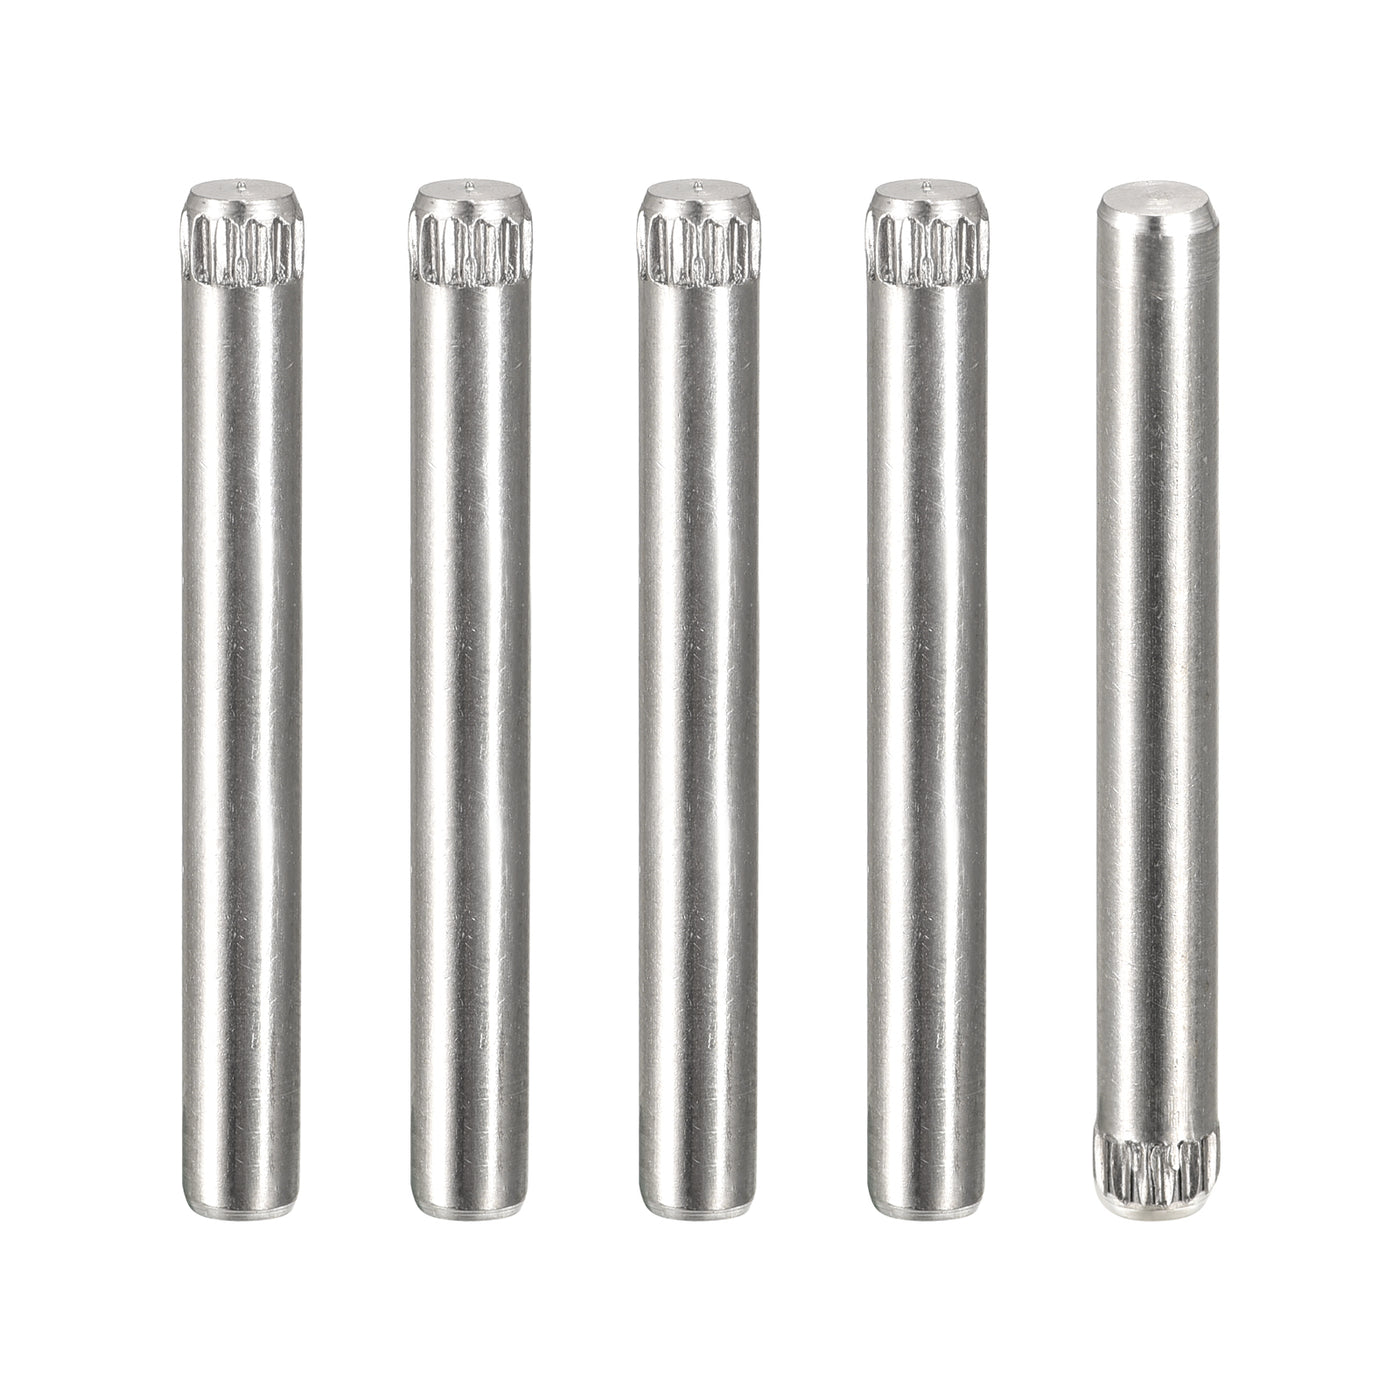 uxcell Uxcell 4x40mm 304 Stainless Steel Dowel Pins, 5Pcs Knurled Head Flat End Dowel Pin